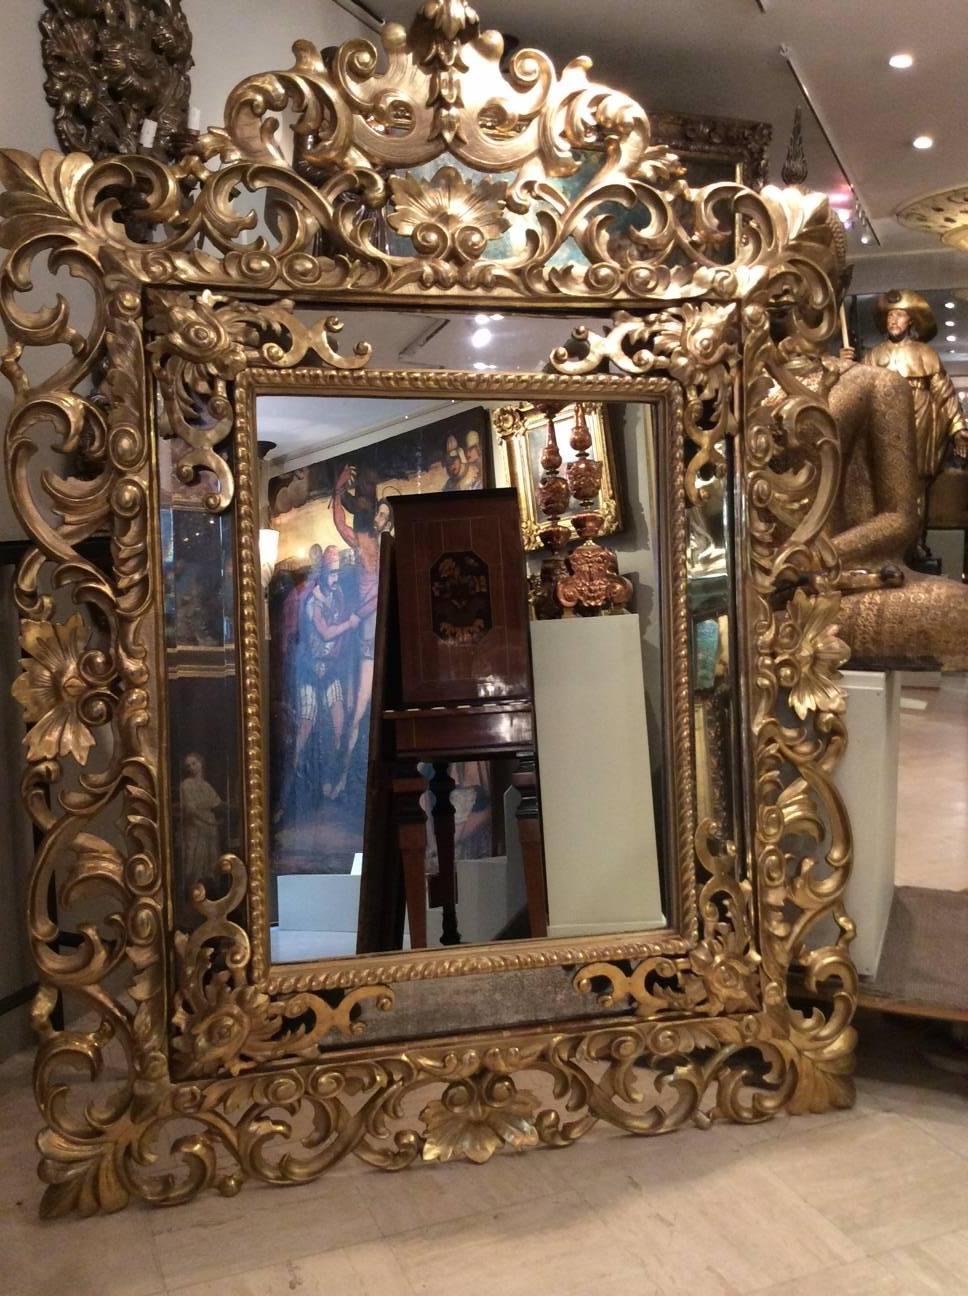 19th century sculpted giltwood mirror with partitions. Beveled mercury mirrors. Central mirror was changed as too damaged.
Italian workshop, second half of the 19th century, probably Rome, Italy.

